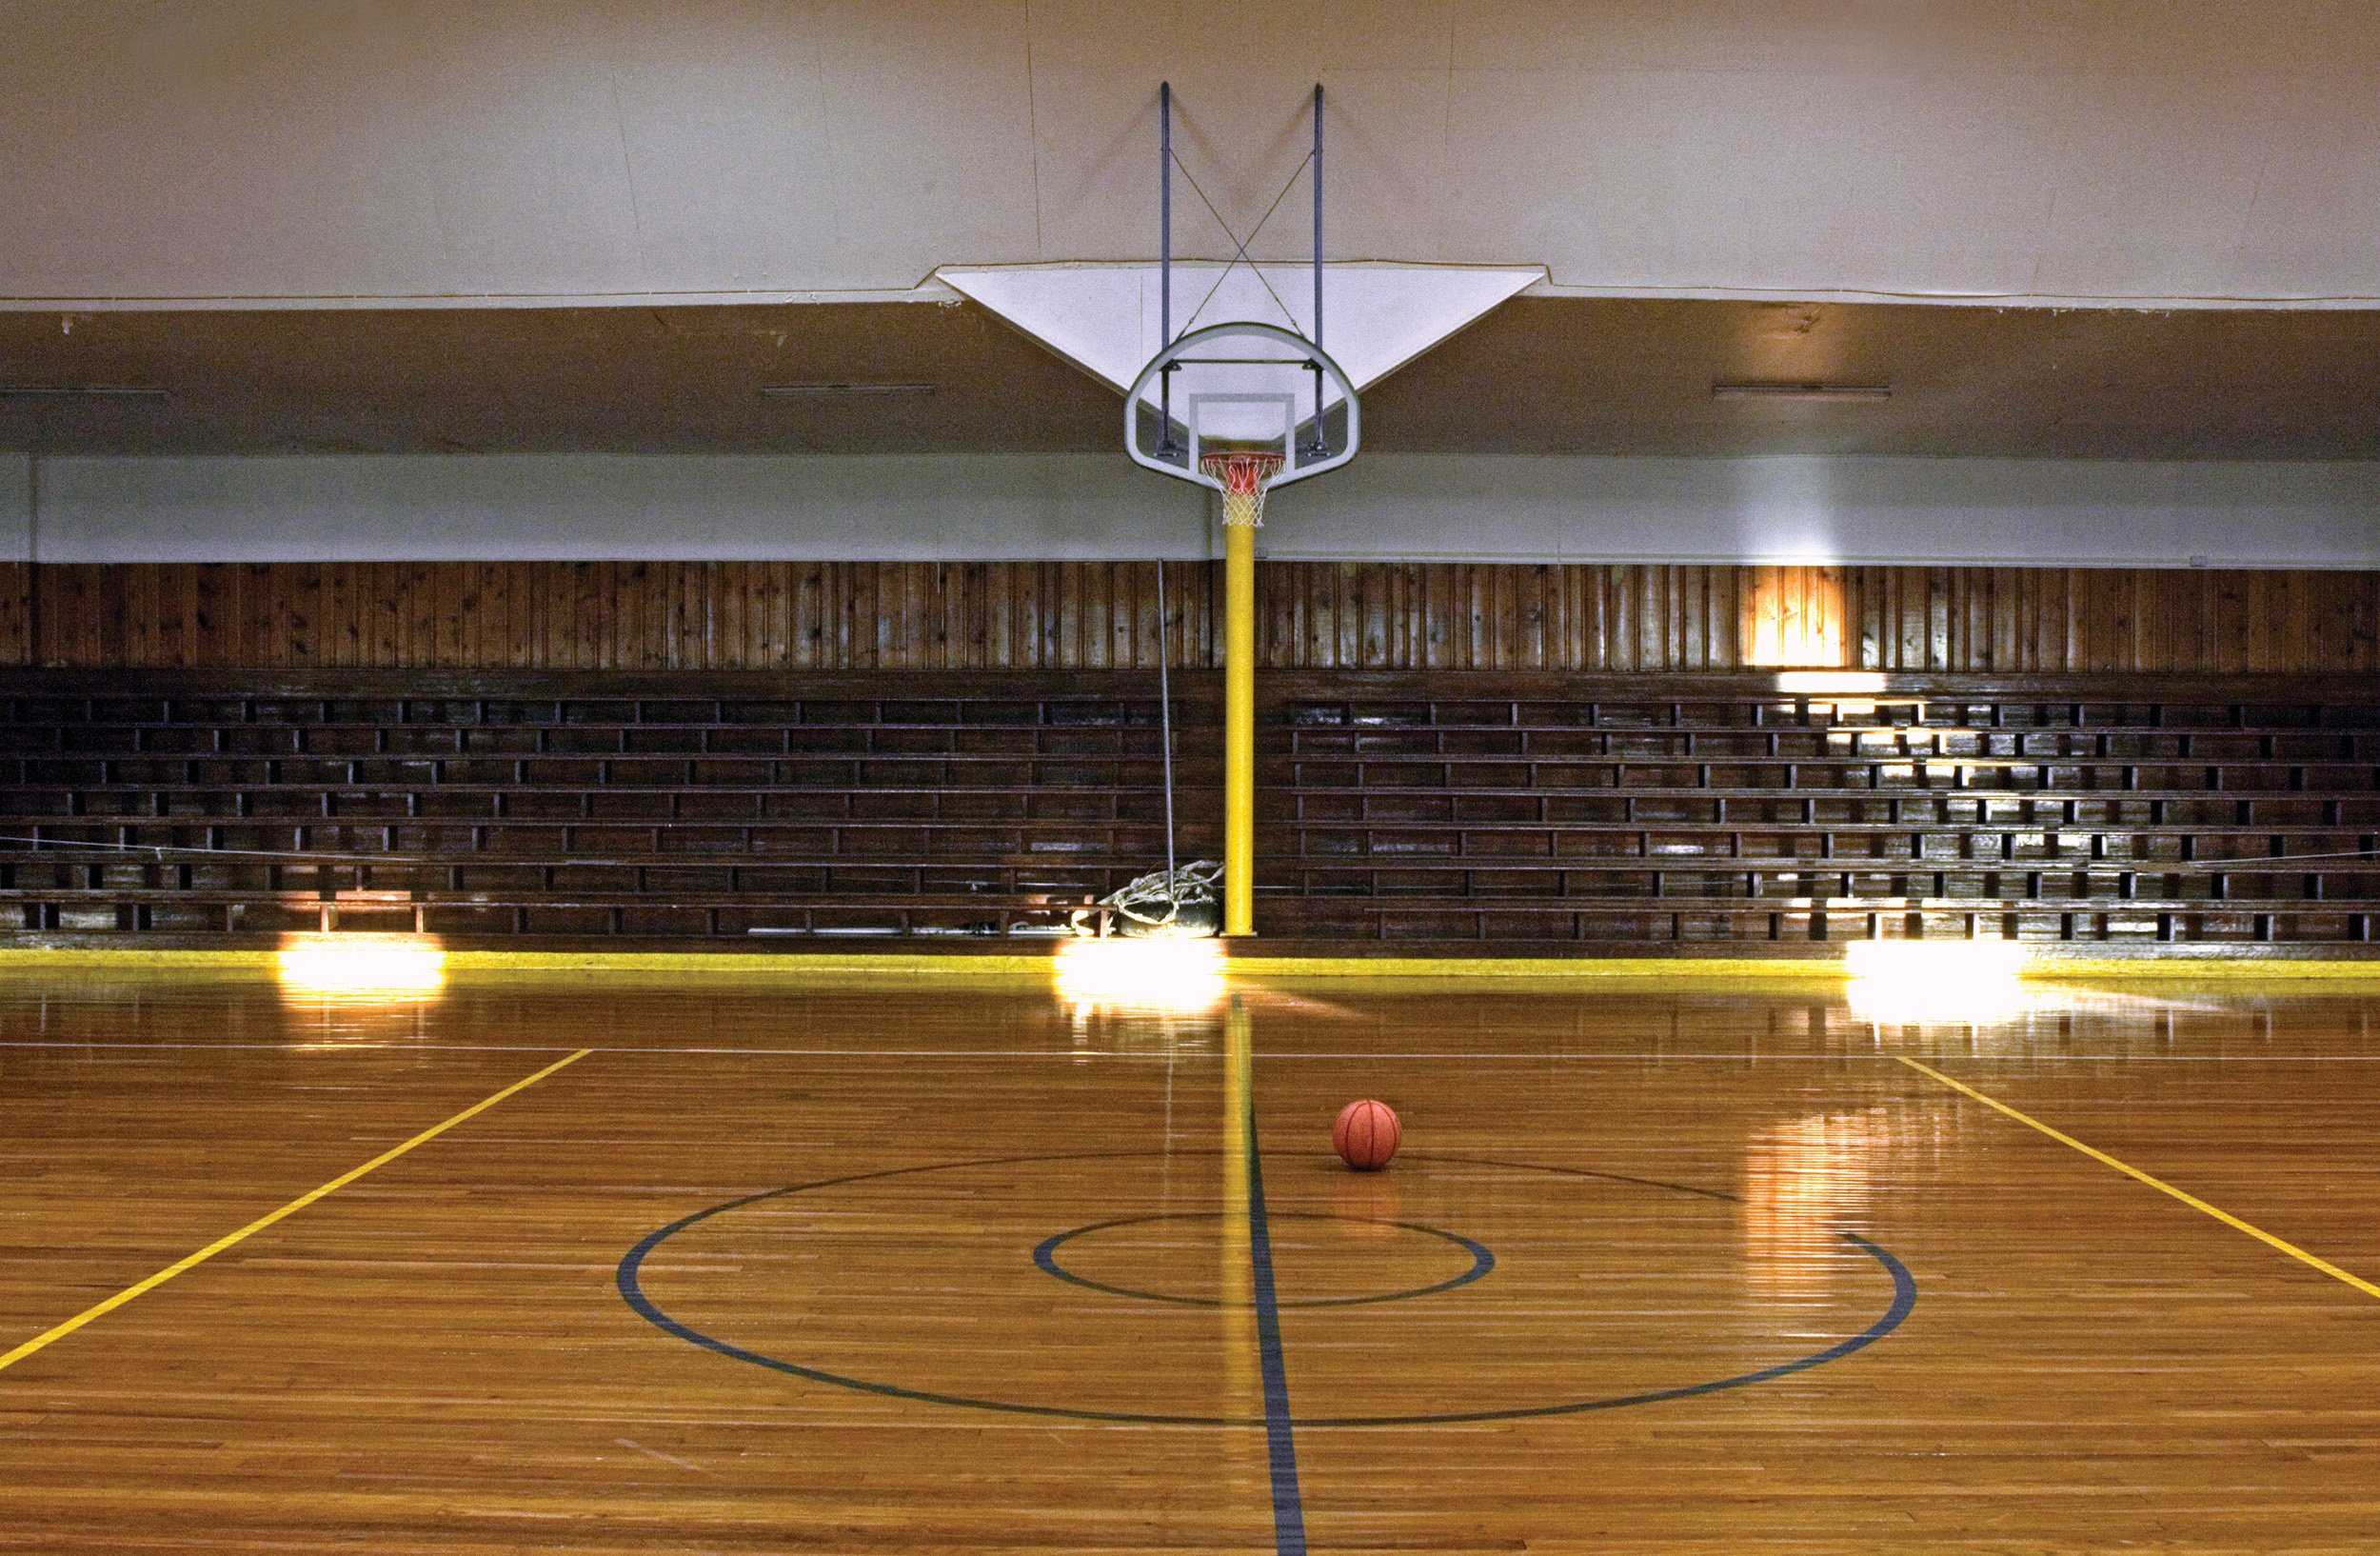  Plymouth High School gym. Plymouth IL. May, 2010 